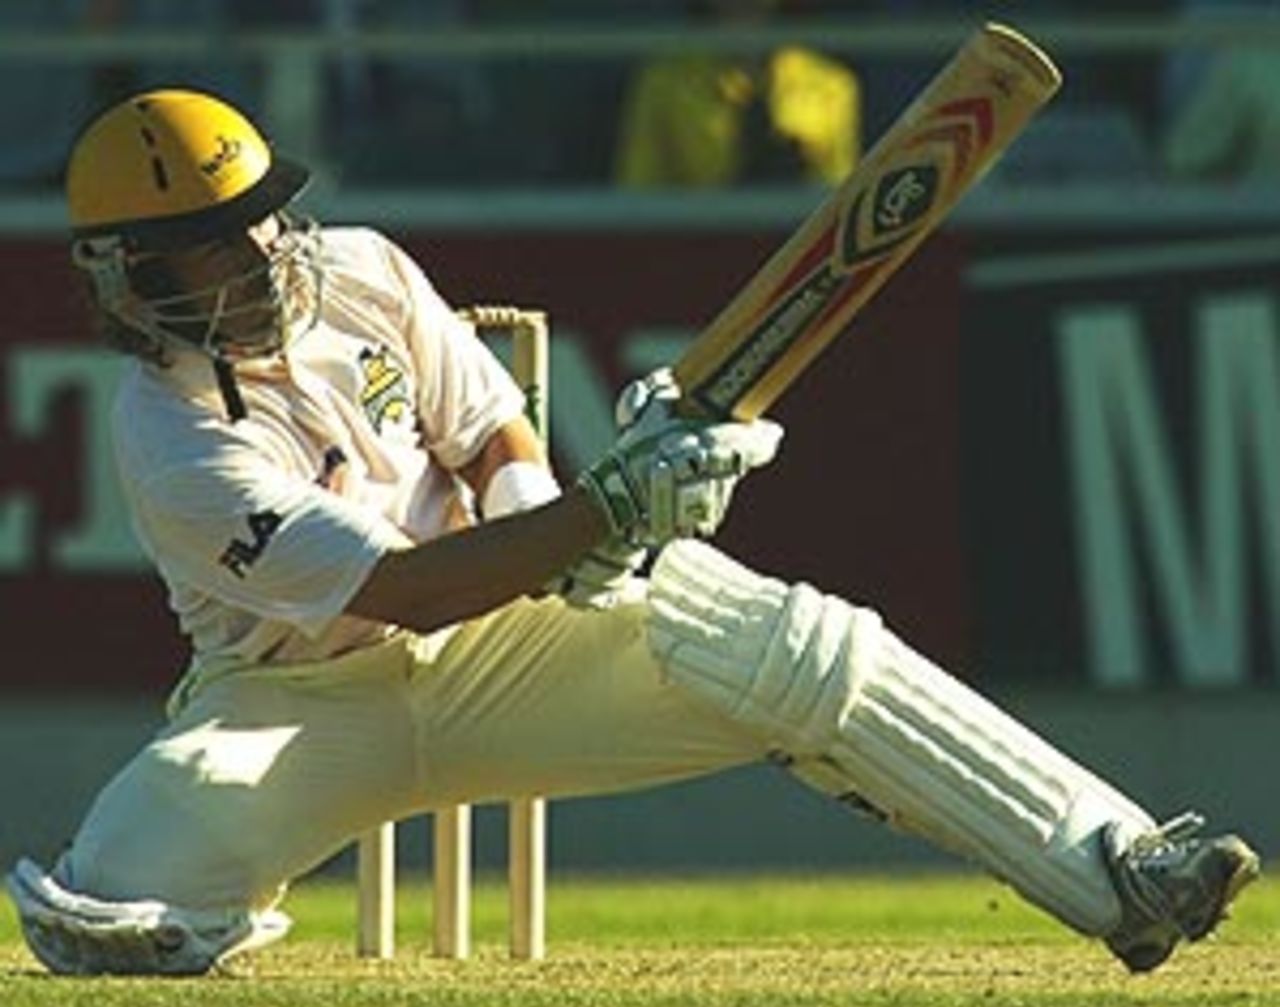 Ryan Campbell of Western Australia in action during day three of the tour match between Western Australia and Zimbabwe played at the WACA on October 5, 2003 in Perth, Australia.